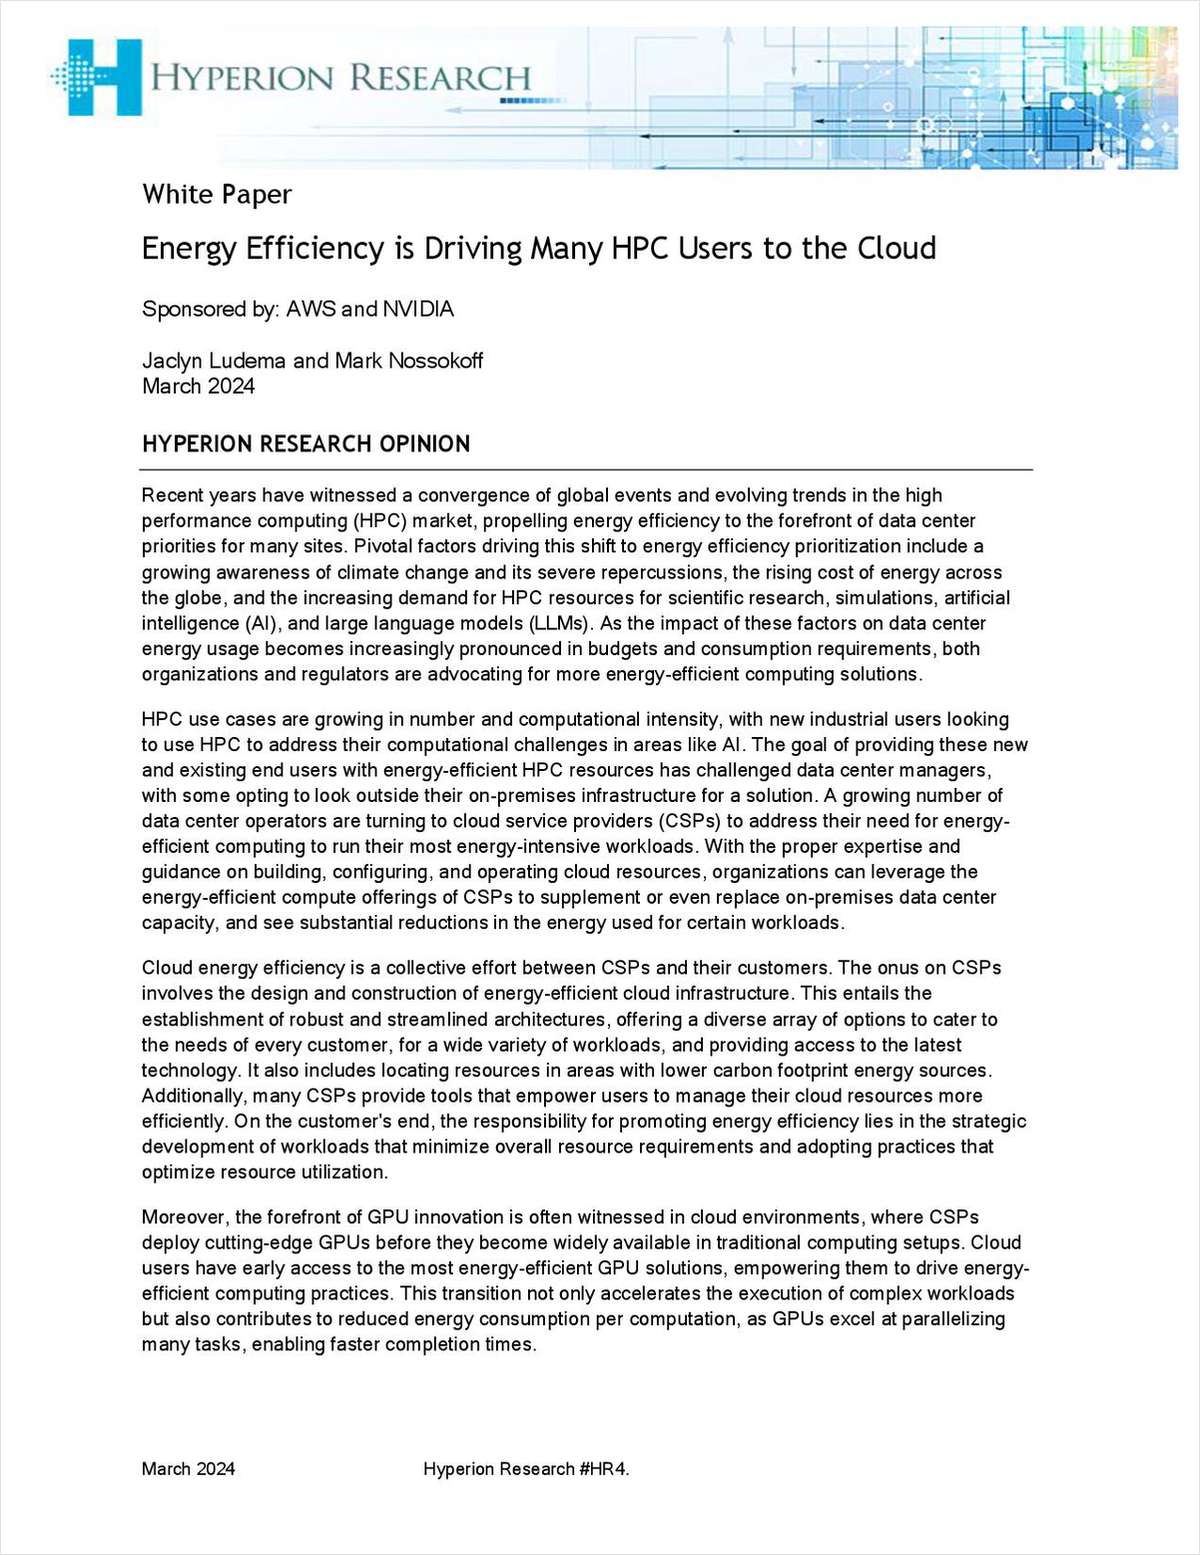 Energy Efficiency Drives Many HPC Users to the Cloud